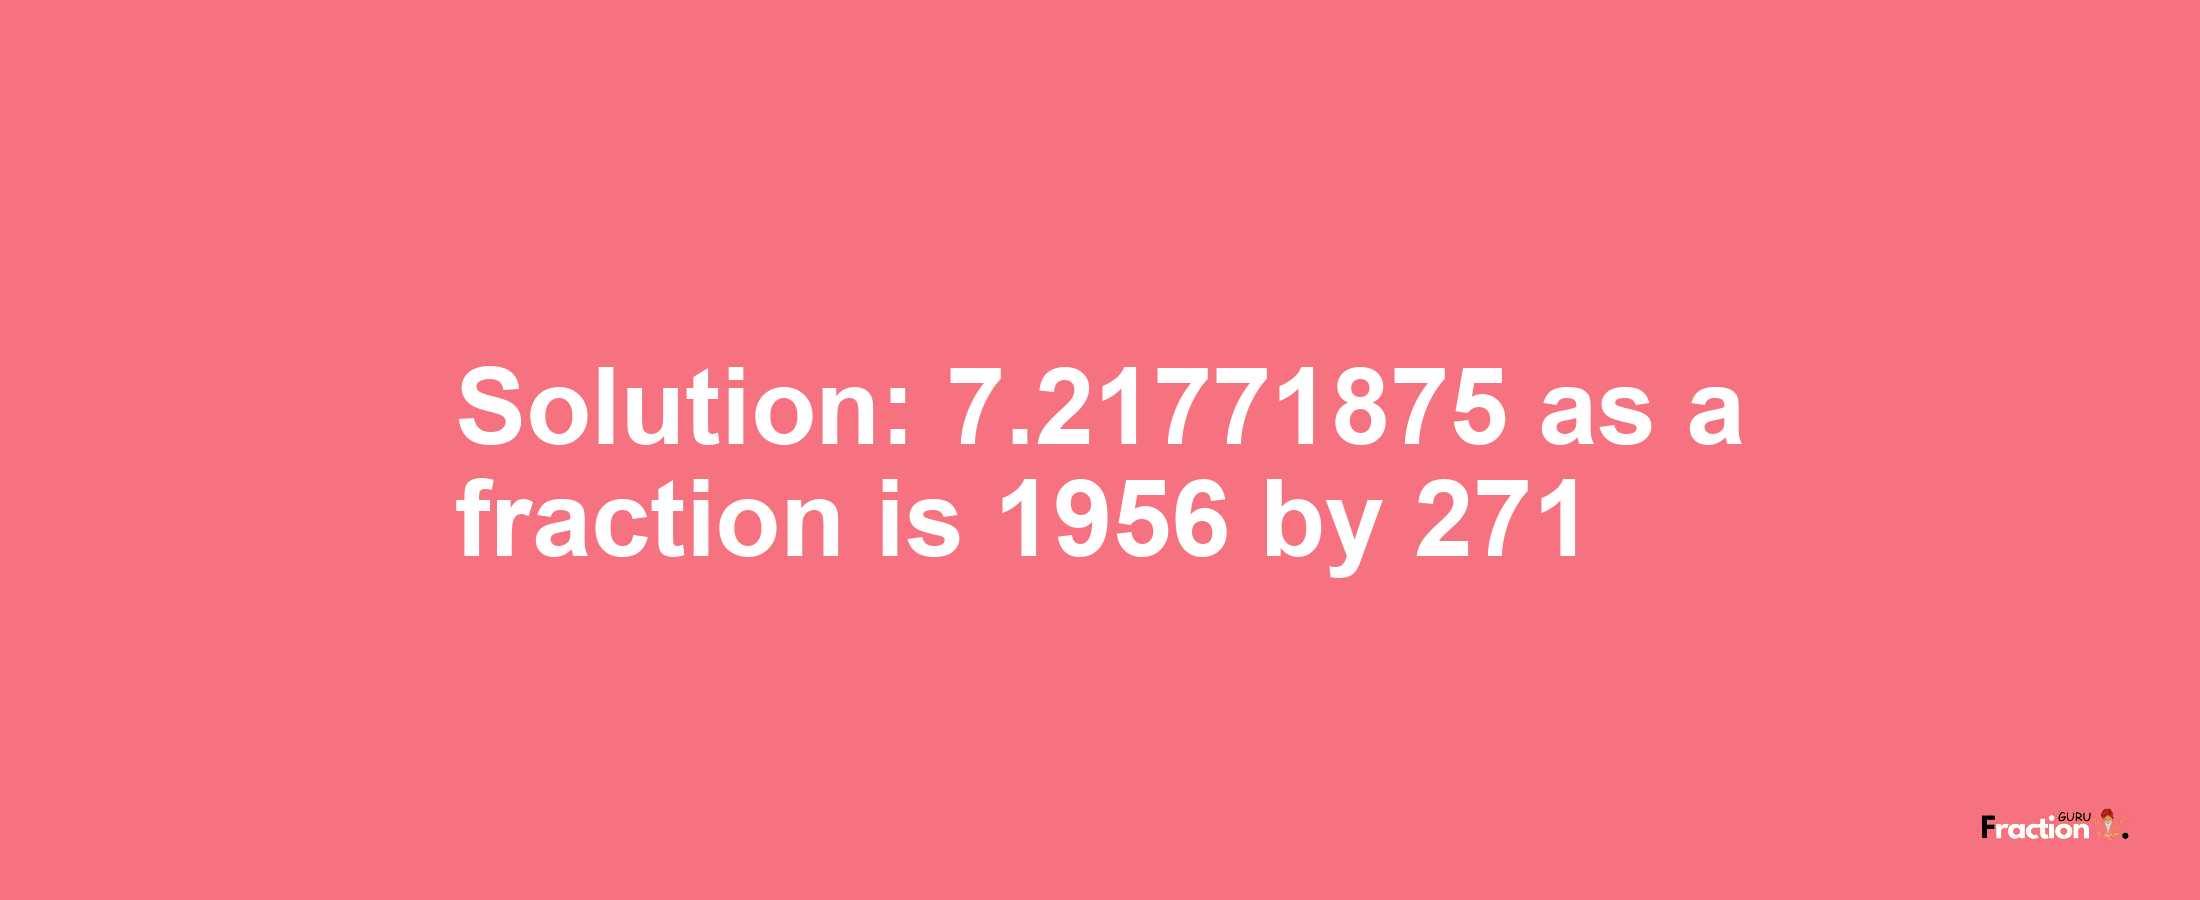 Solution:7.21771875 as a fraction is 1956/271